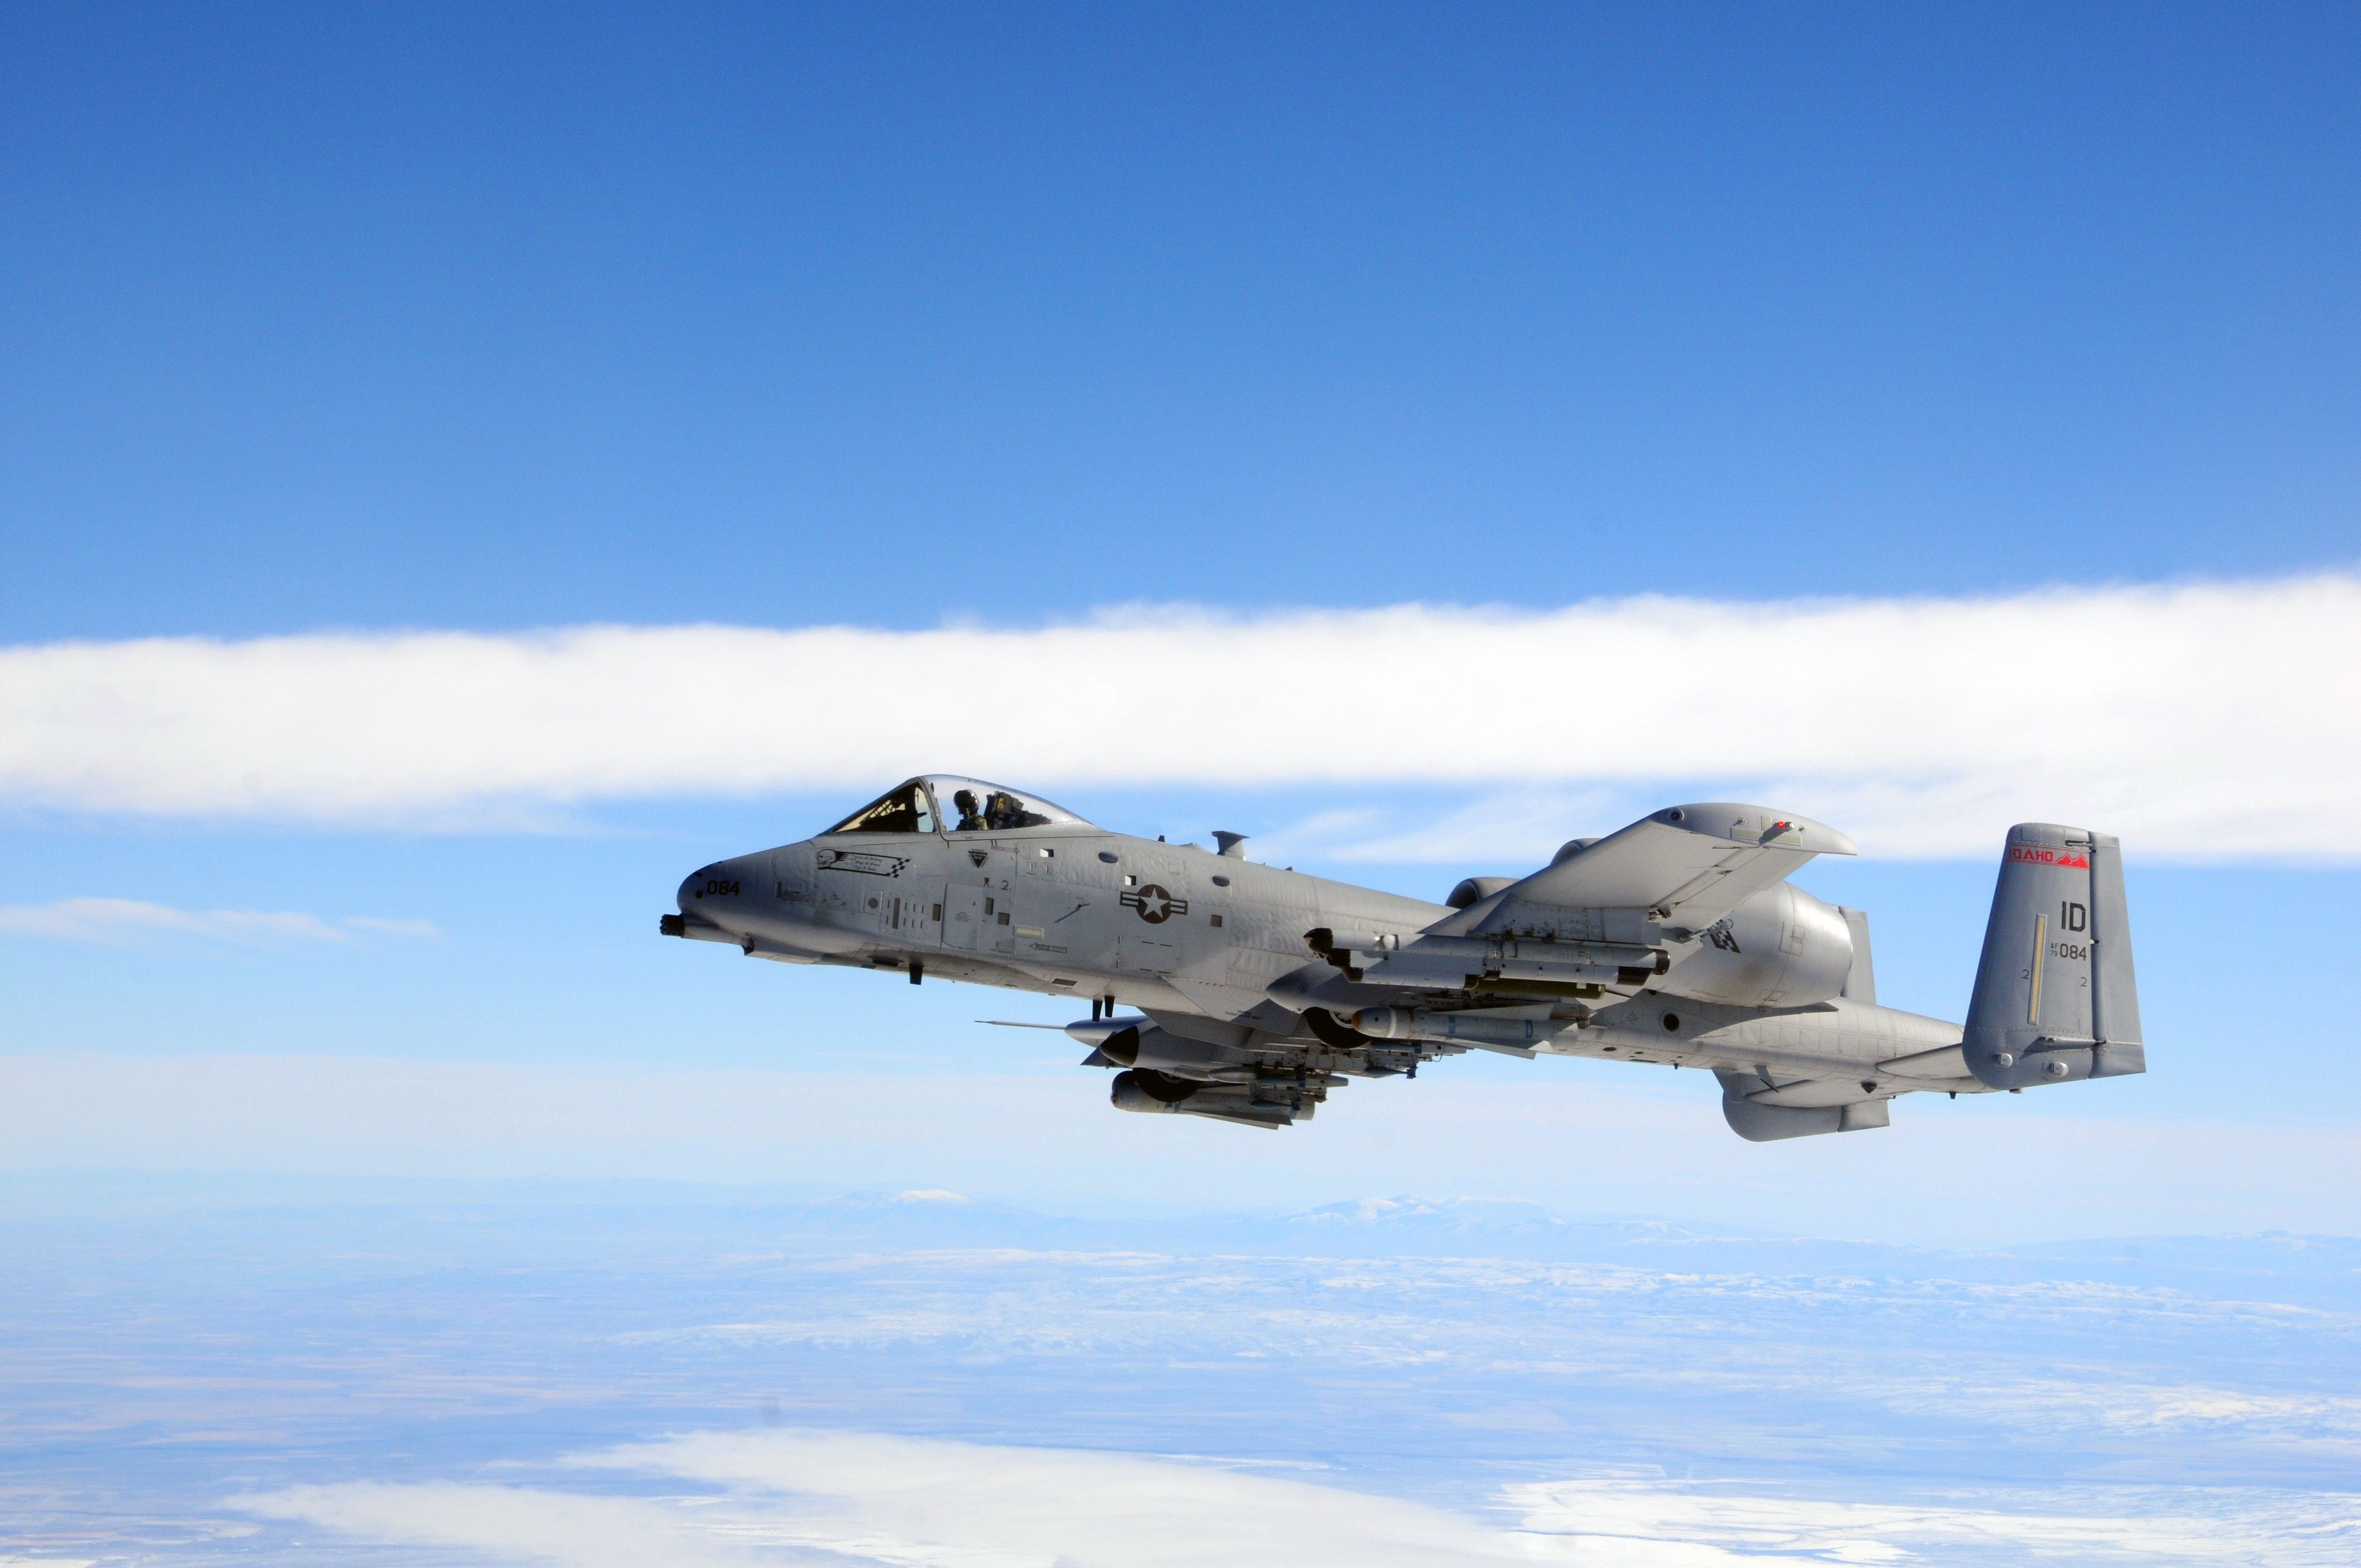 A-10C Warthog of Idaho ANG flying in the sky.